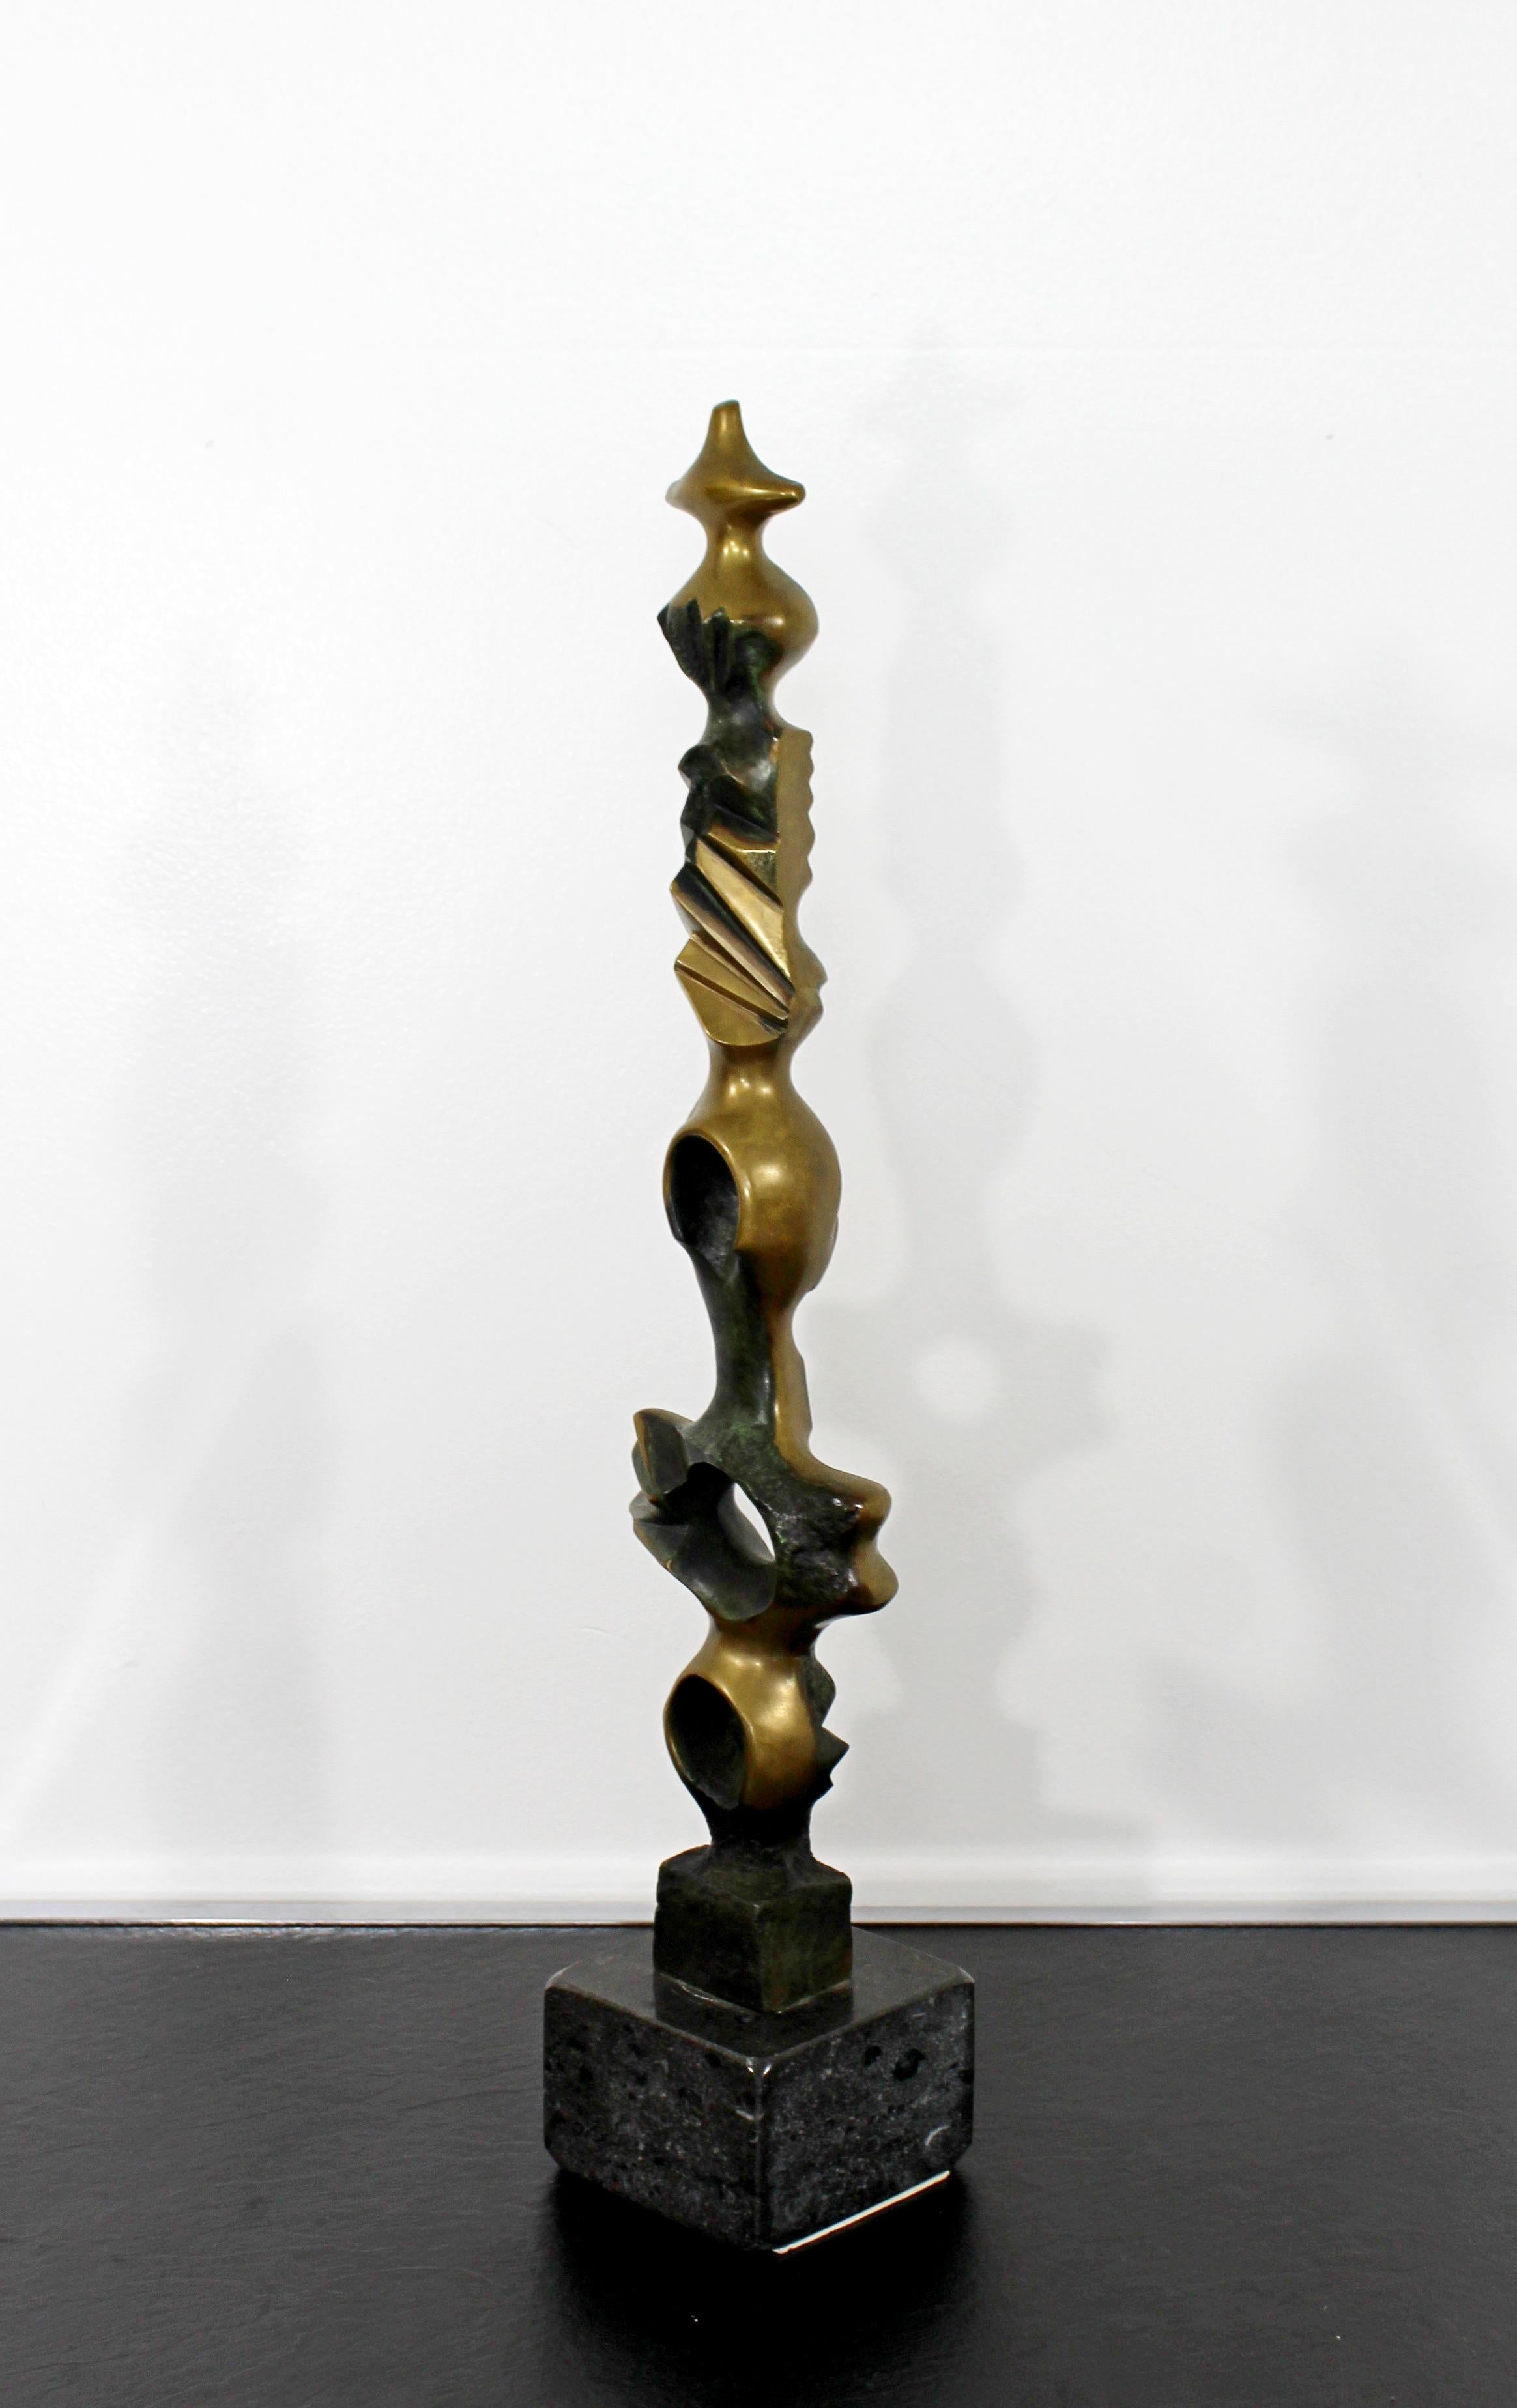 Spanish Contemporary Bronze Marble Table Sculpture Signed by Kieff Grediaga TOTEM, 1980s